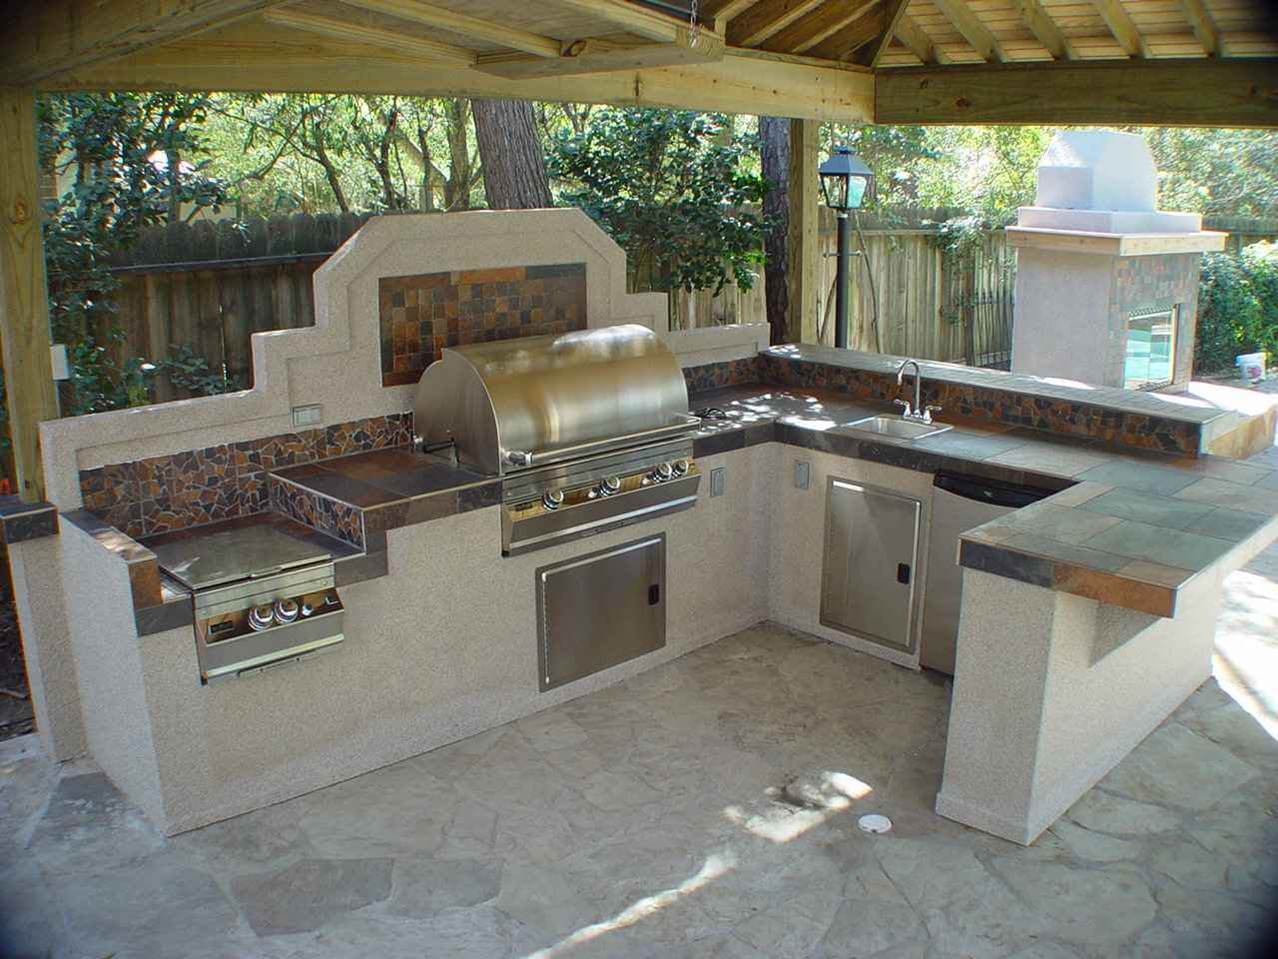 Outdoor kitchen with separate light source